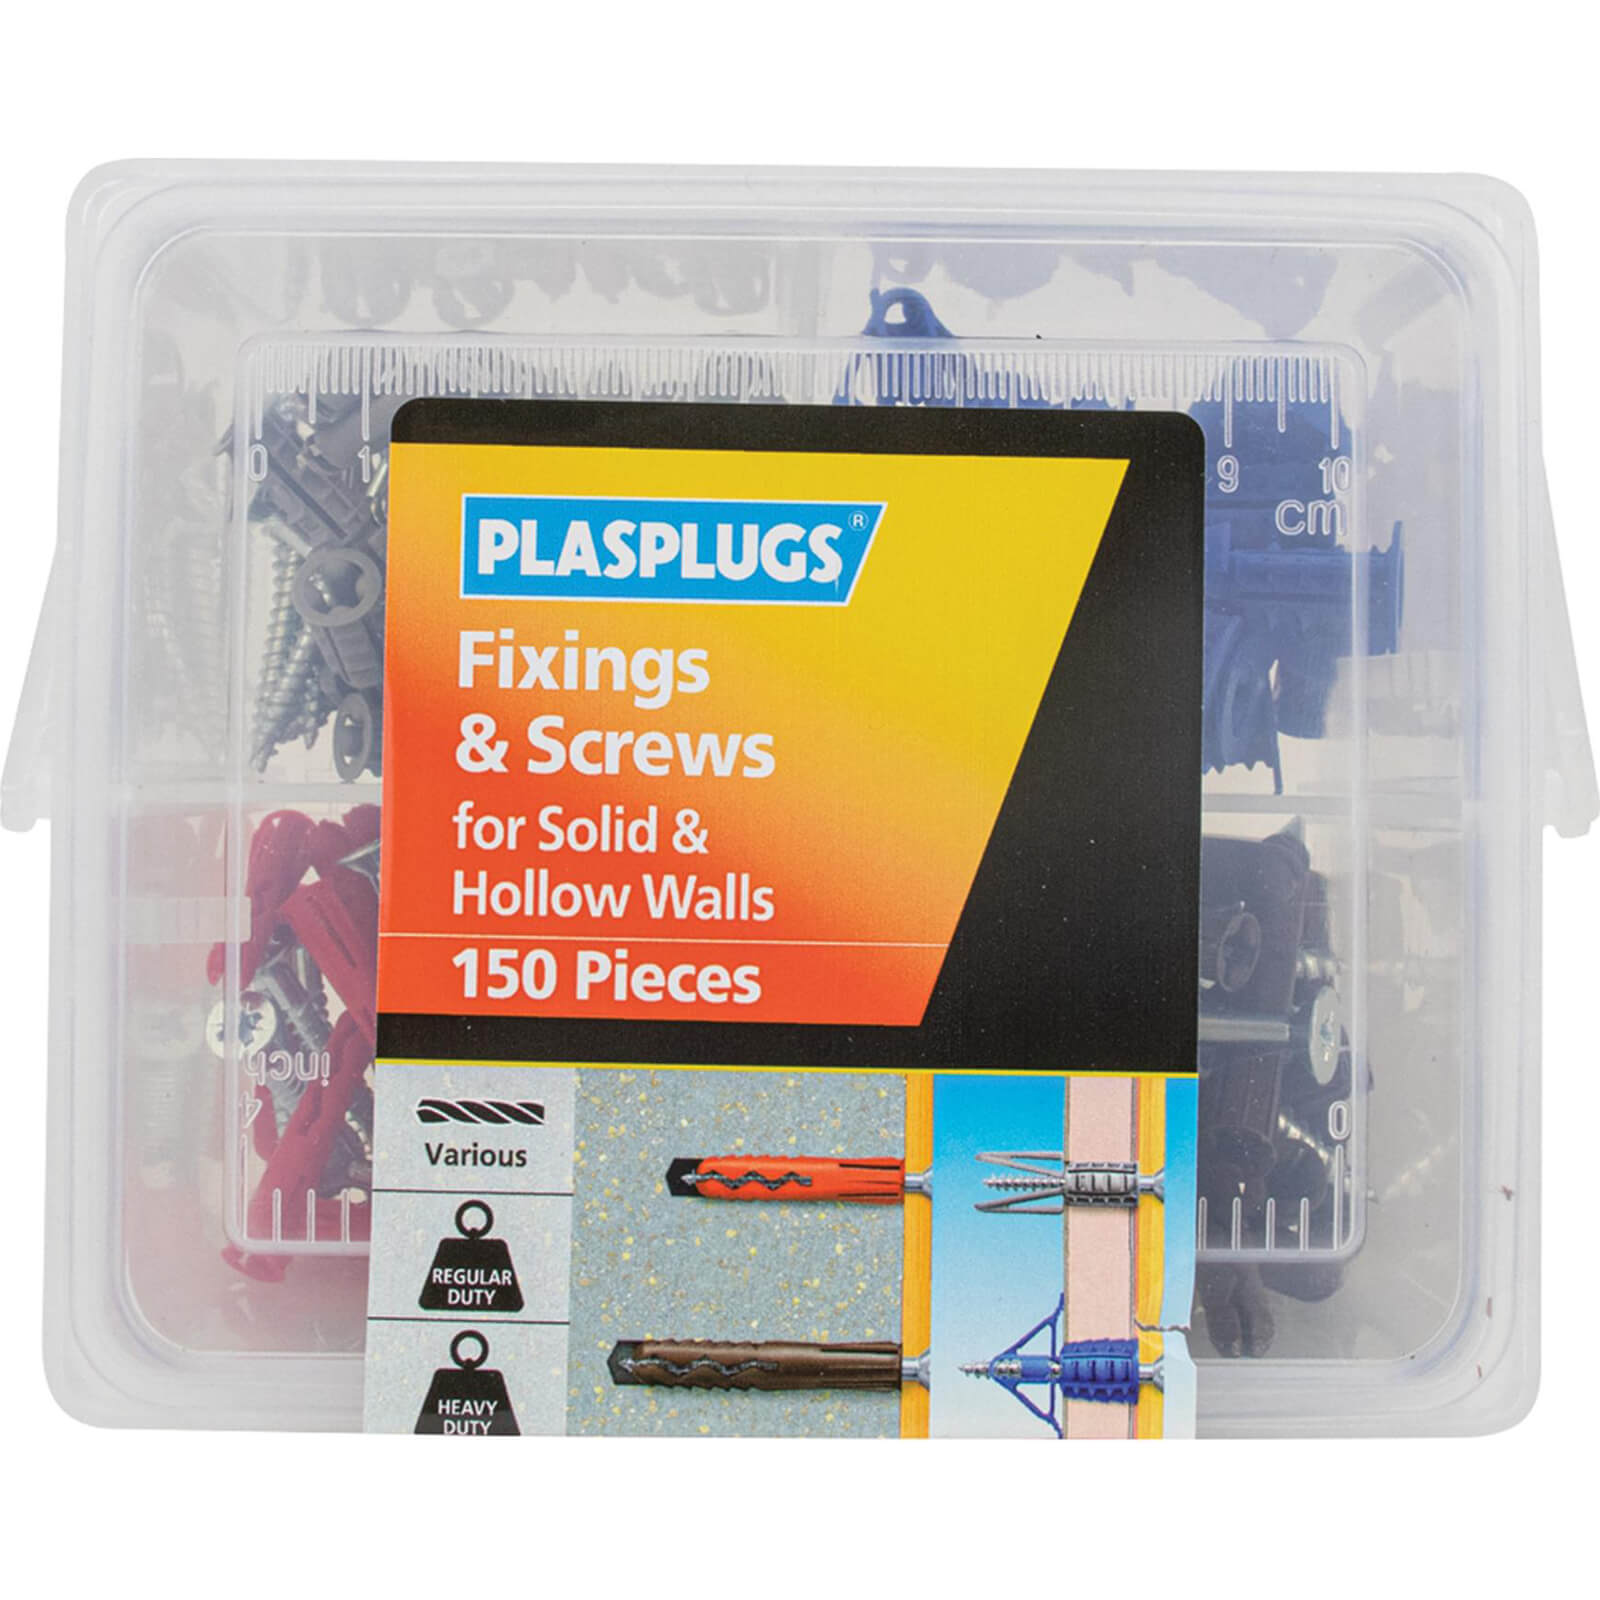 Image of Plasplugs 150 Piece Fixings and Screws Kit for Solid and Hollow Walls